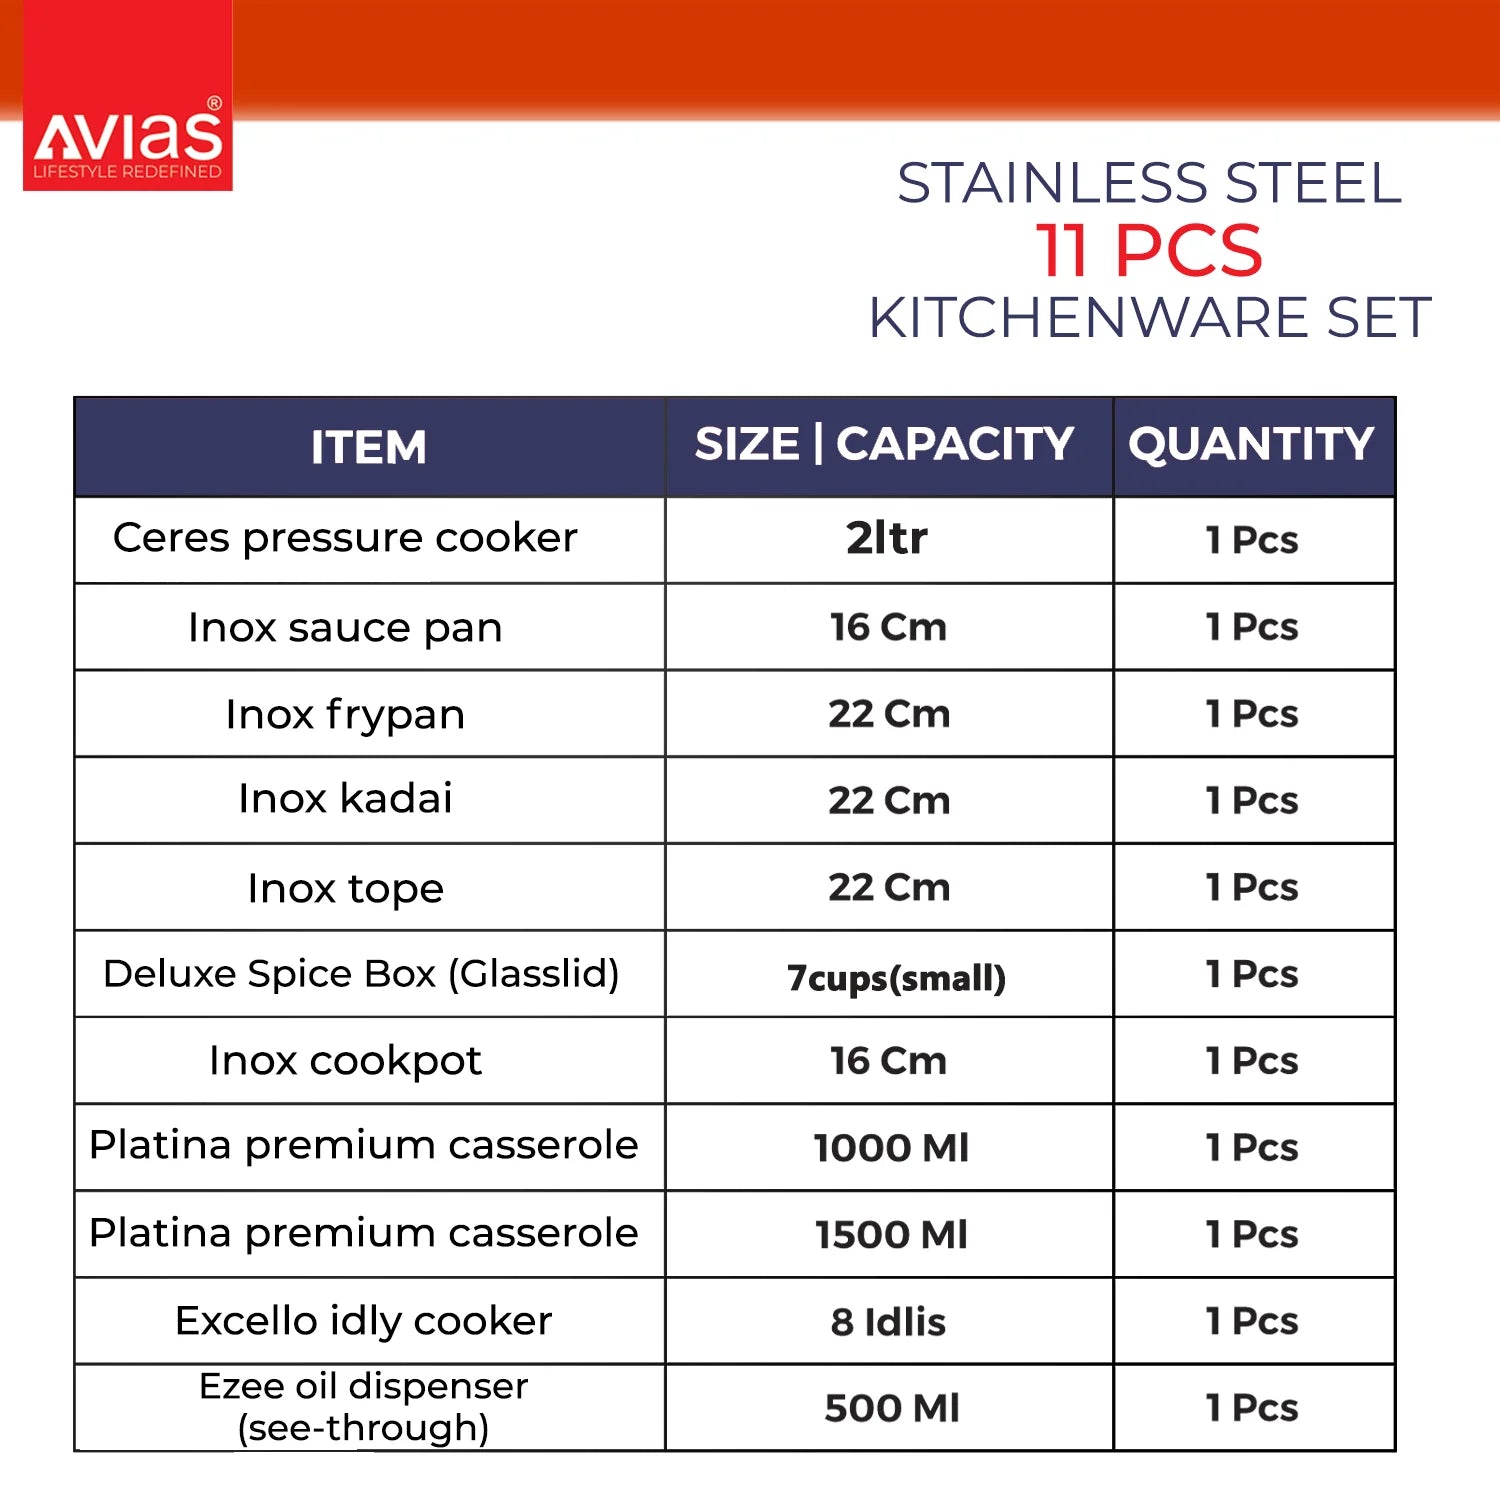 Avias Stainless Steel 11 PCS Kitchen set size and quantity